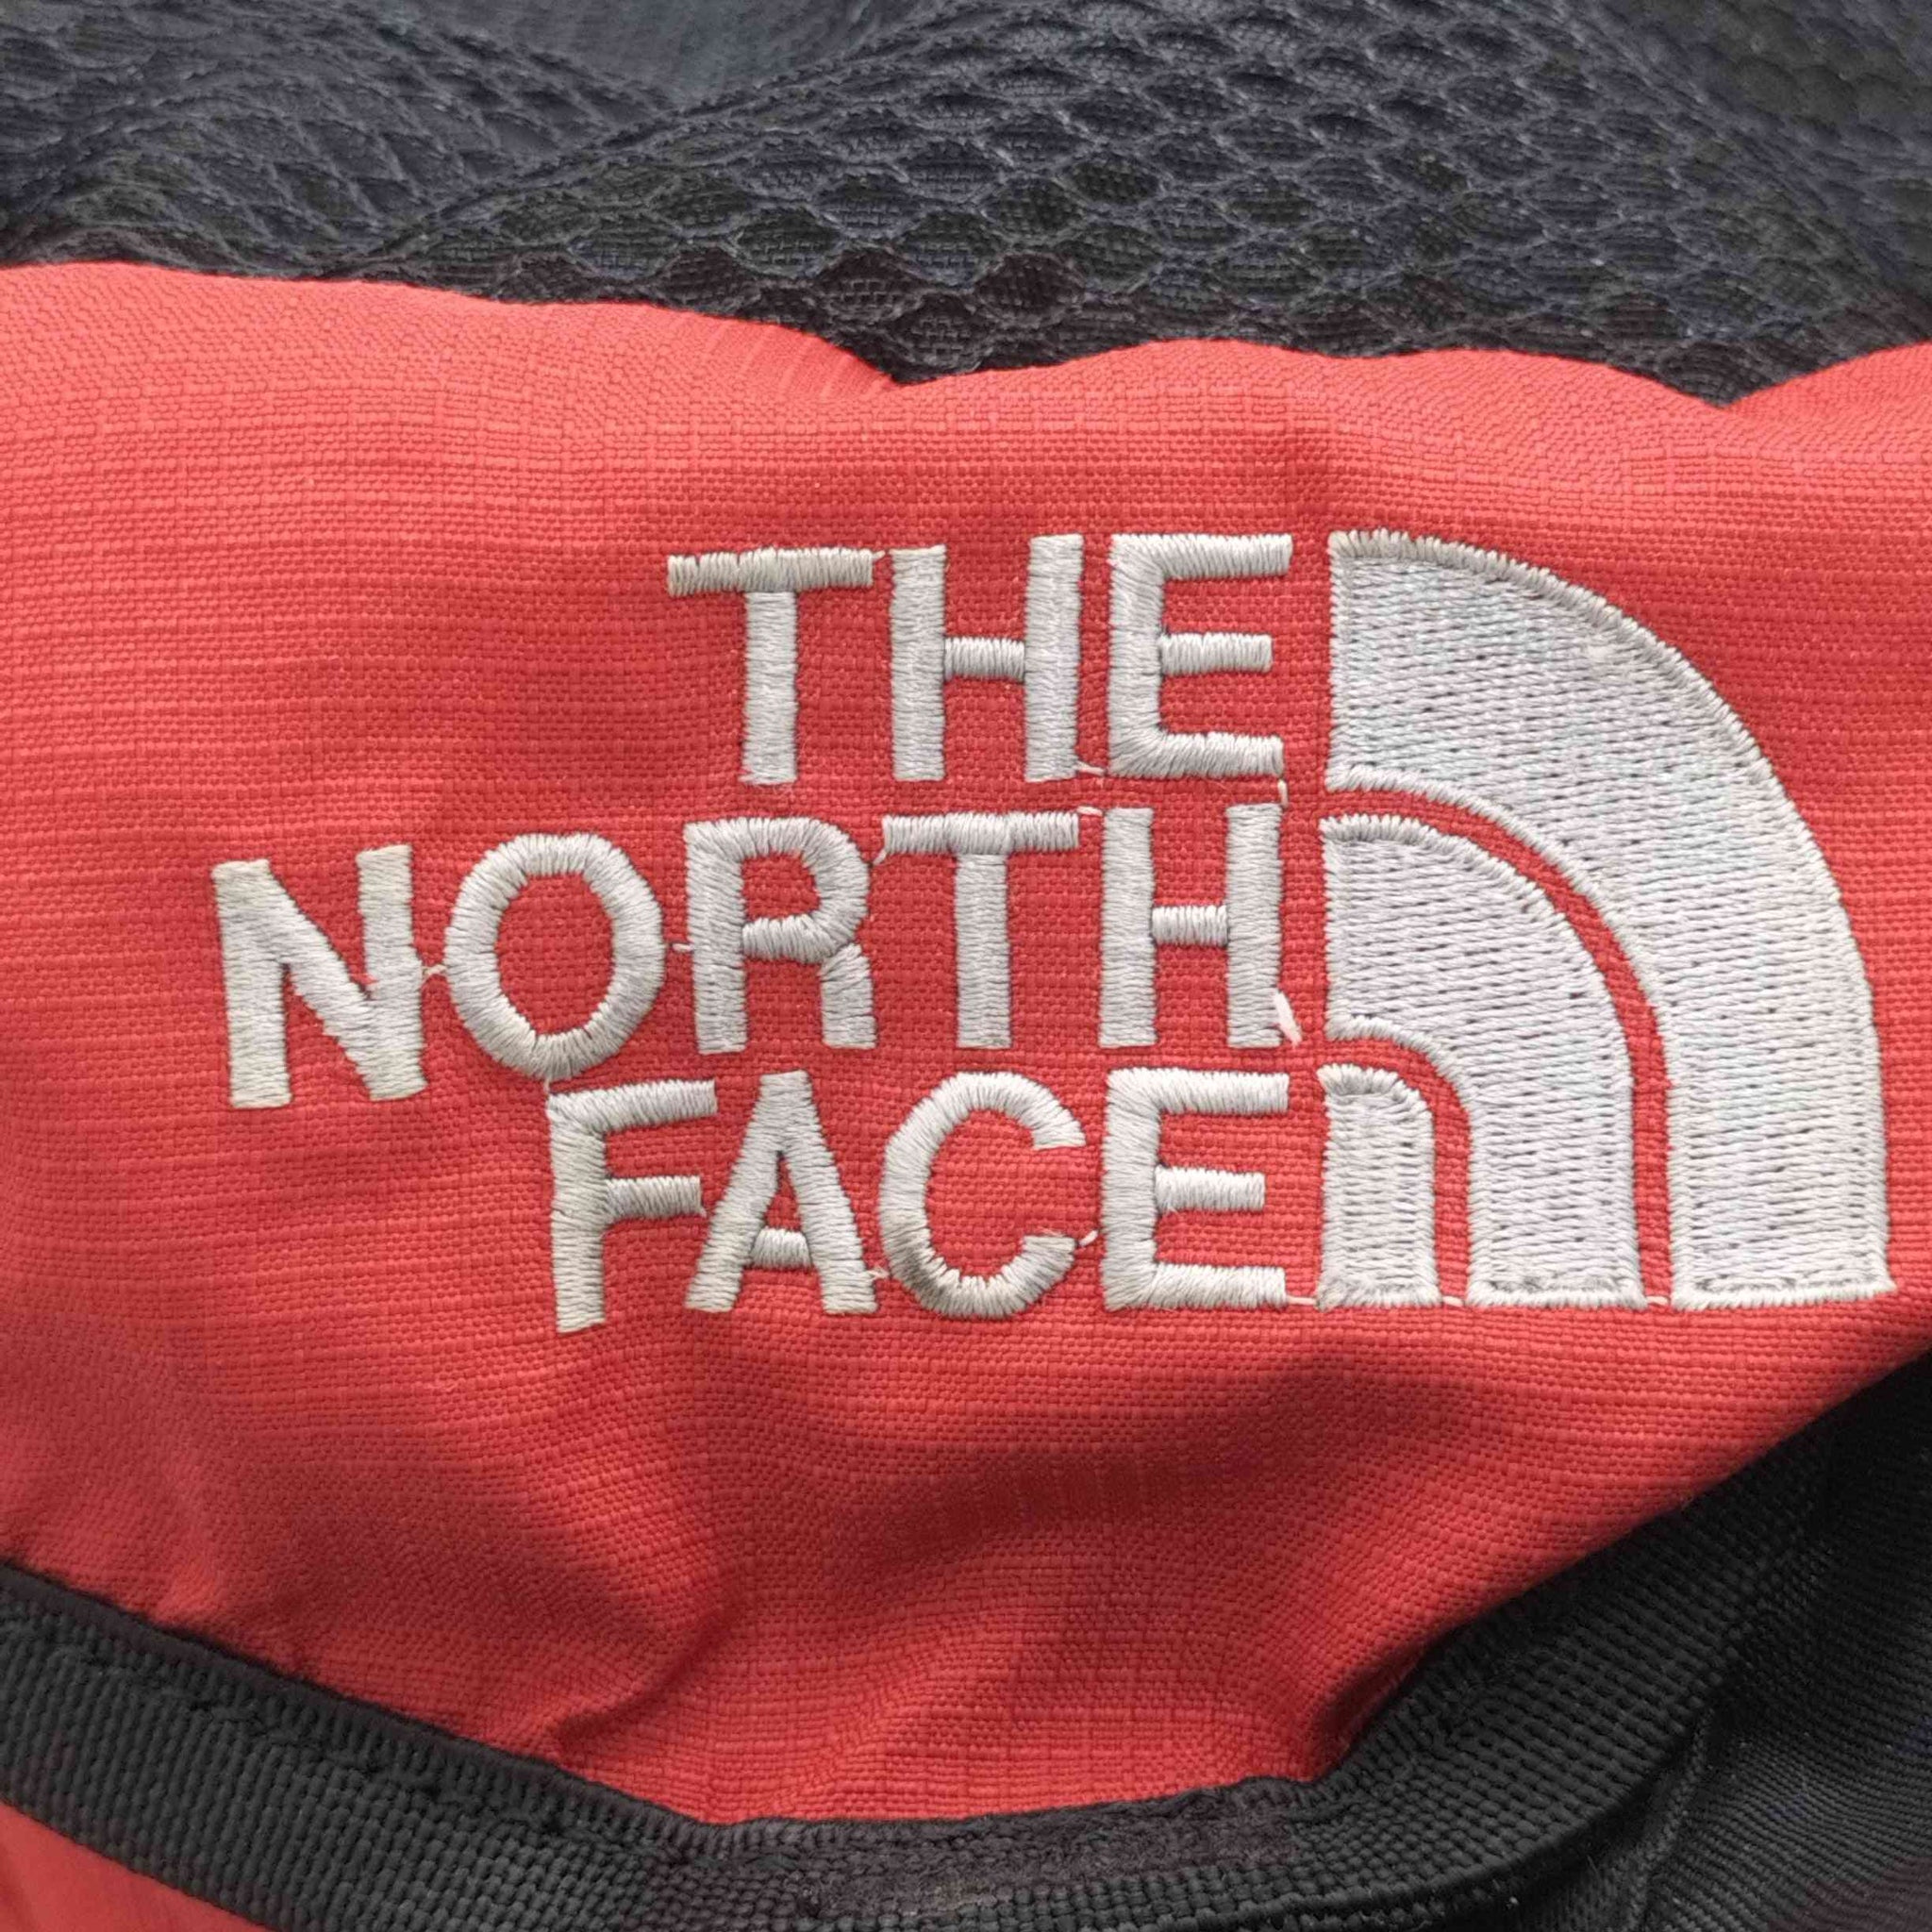 THE NORTH FACE(ザノースフェイス)TRADE WIND リュック バックパック